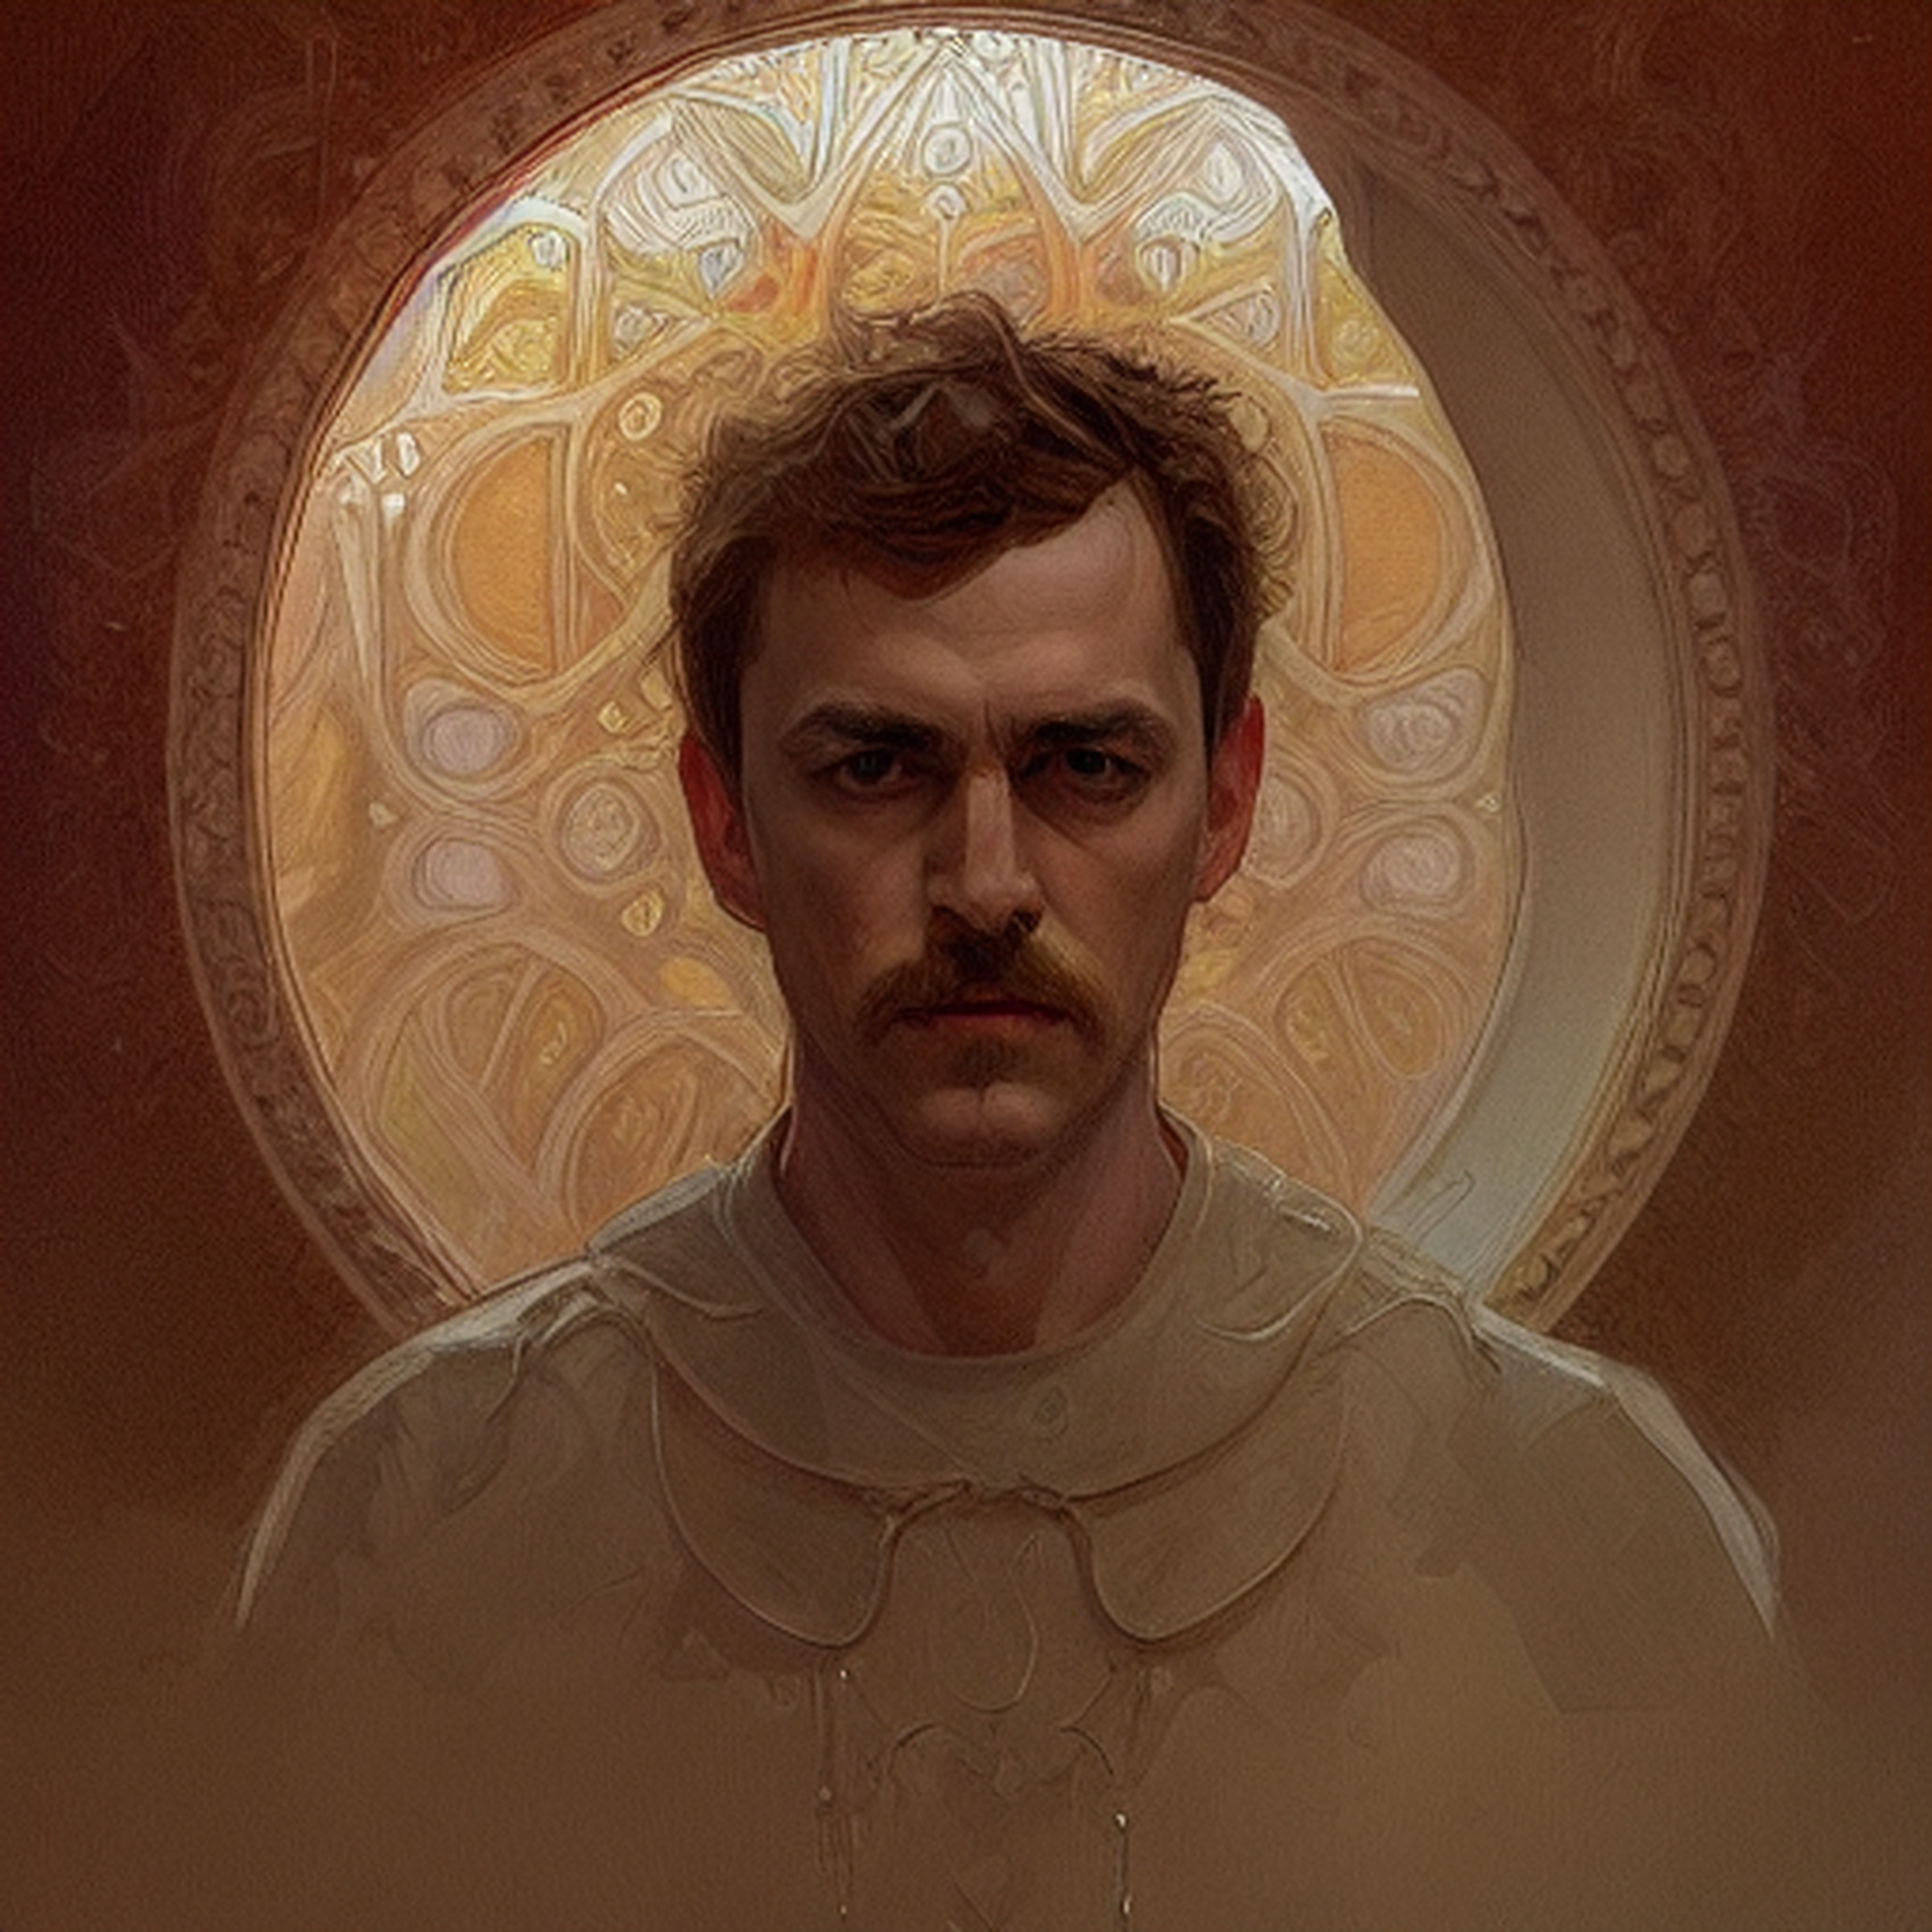 An AI-generated digital painting of a white male with gloomy lighting and an artistic background like stained glass.